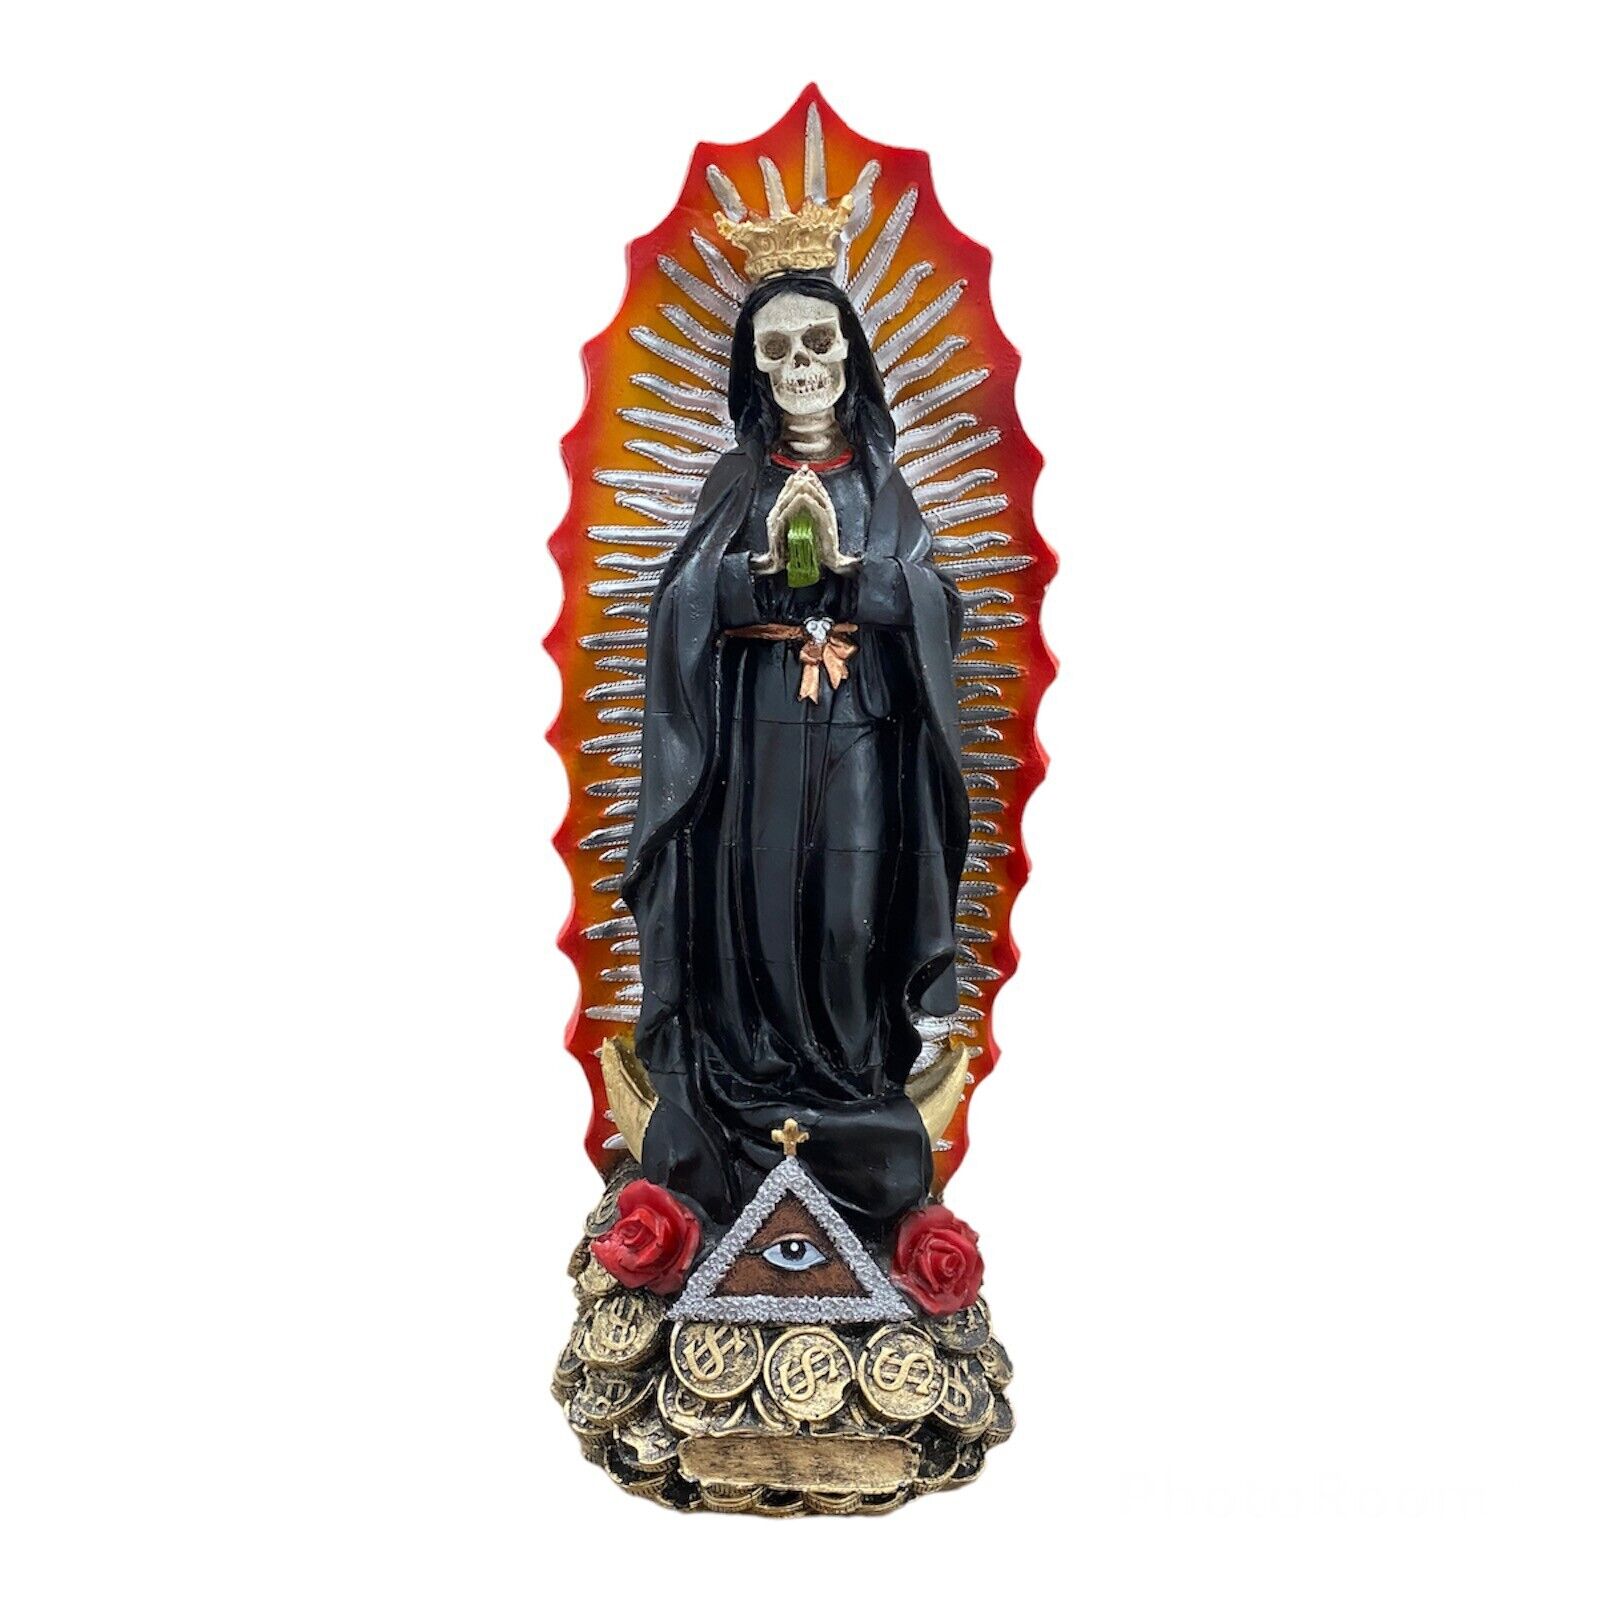 SANTA MUERTE GUADALUPANA / HOLY DEATH STANDING RELIGIOUS STATUE 12 INCH